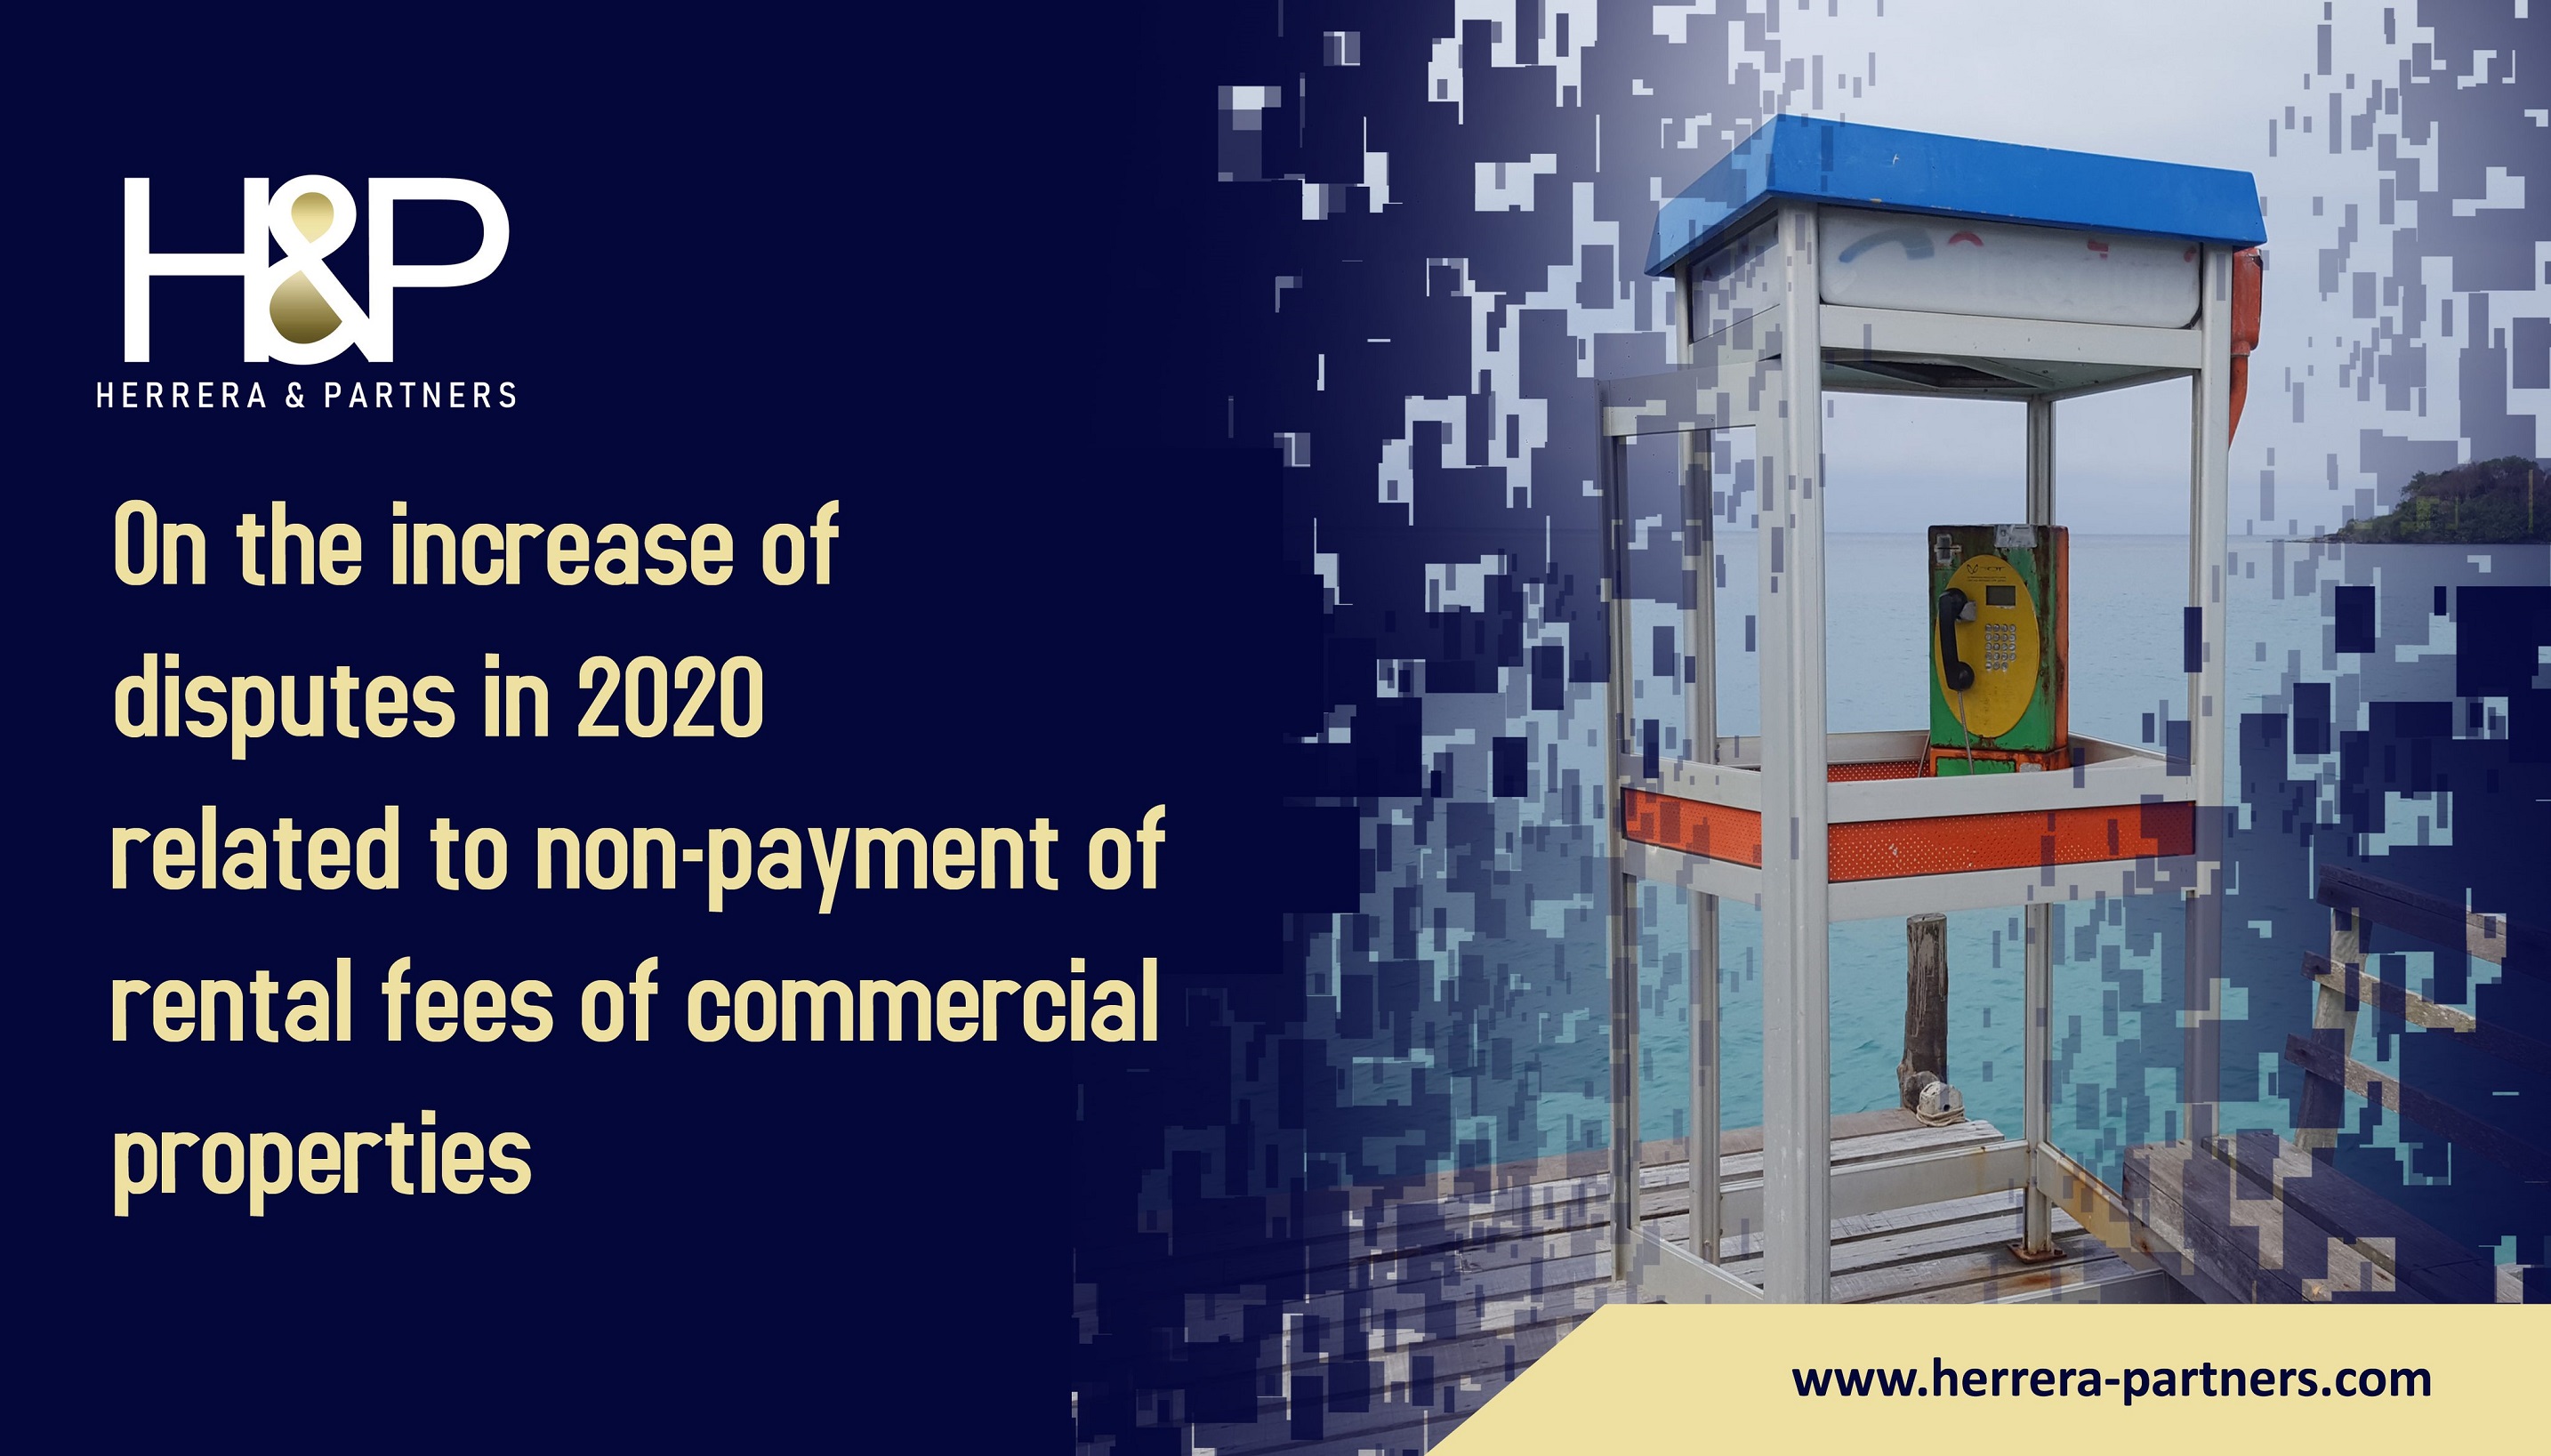 On the increase of disputes in 2020 related to non payment of rental fees of commercial properties H&P Litigation law firm in Thailand